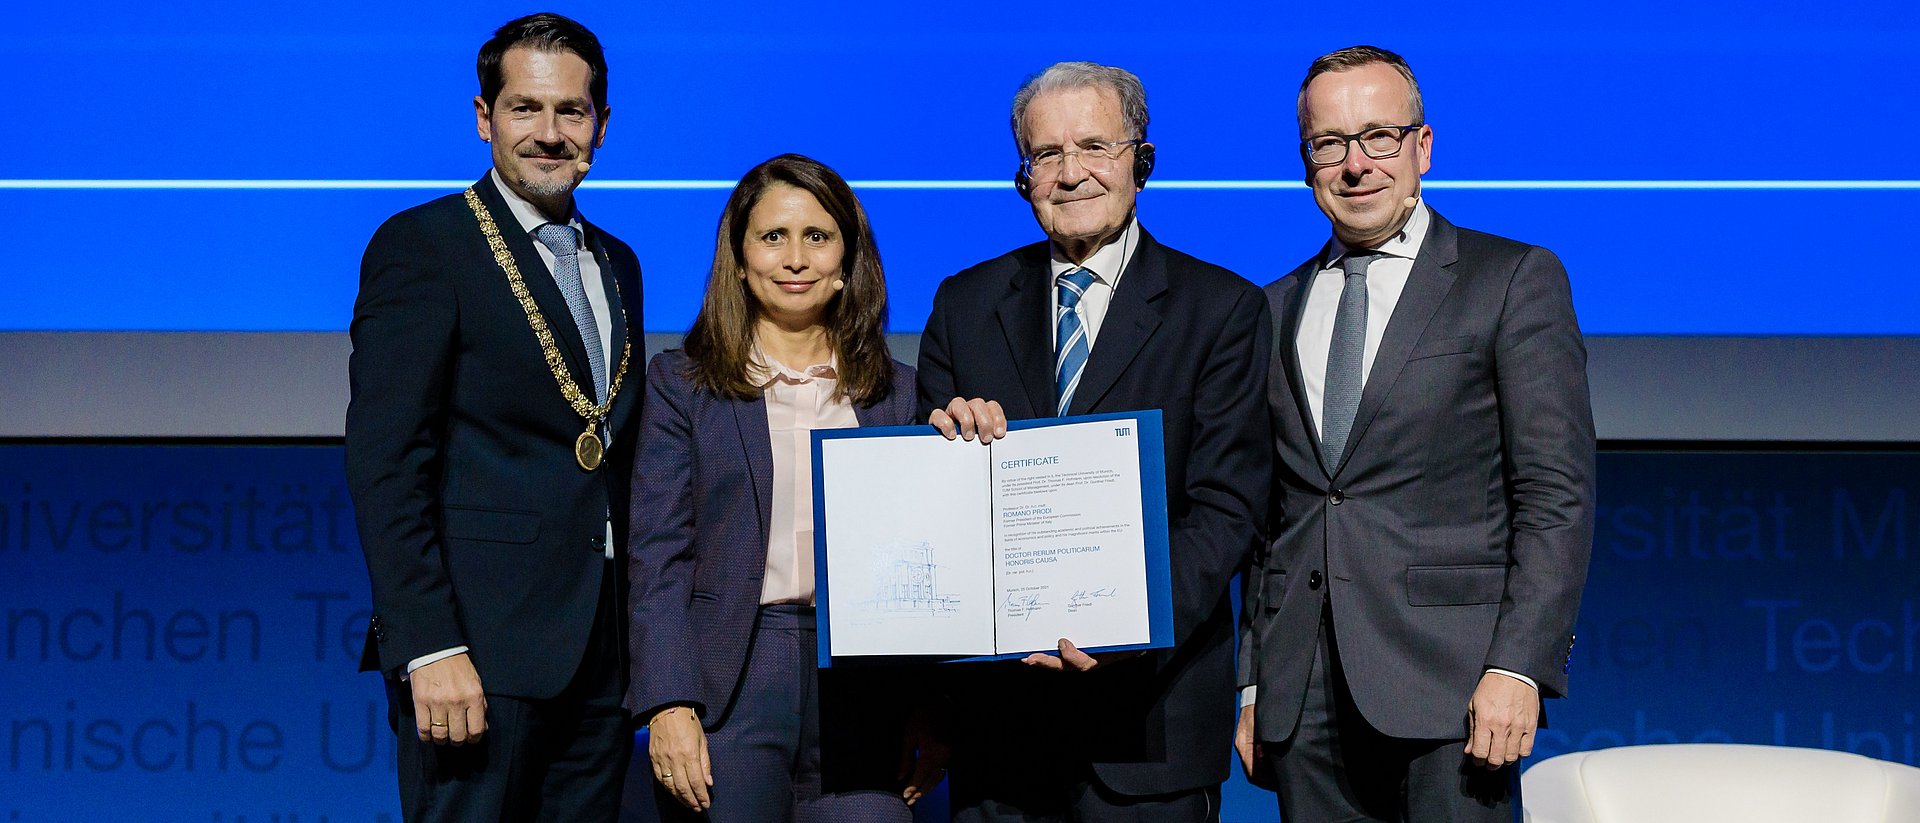 Romano Prodi with TUM President Thomas F. Hofmann (l.), Dean Gunther Friedl (r.), and Eugénia da Conceição-Heldt on stage in the audimax lecture hall.